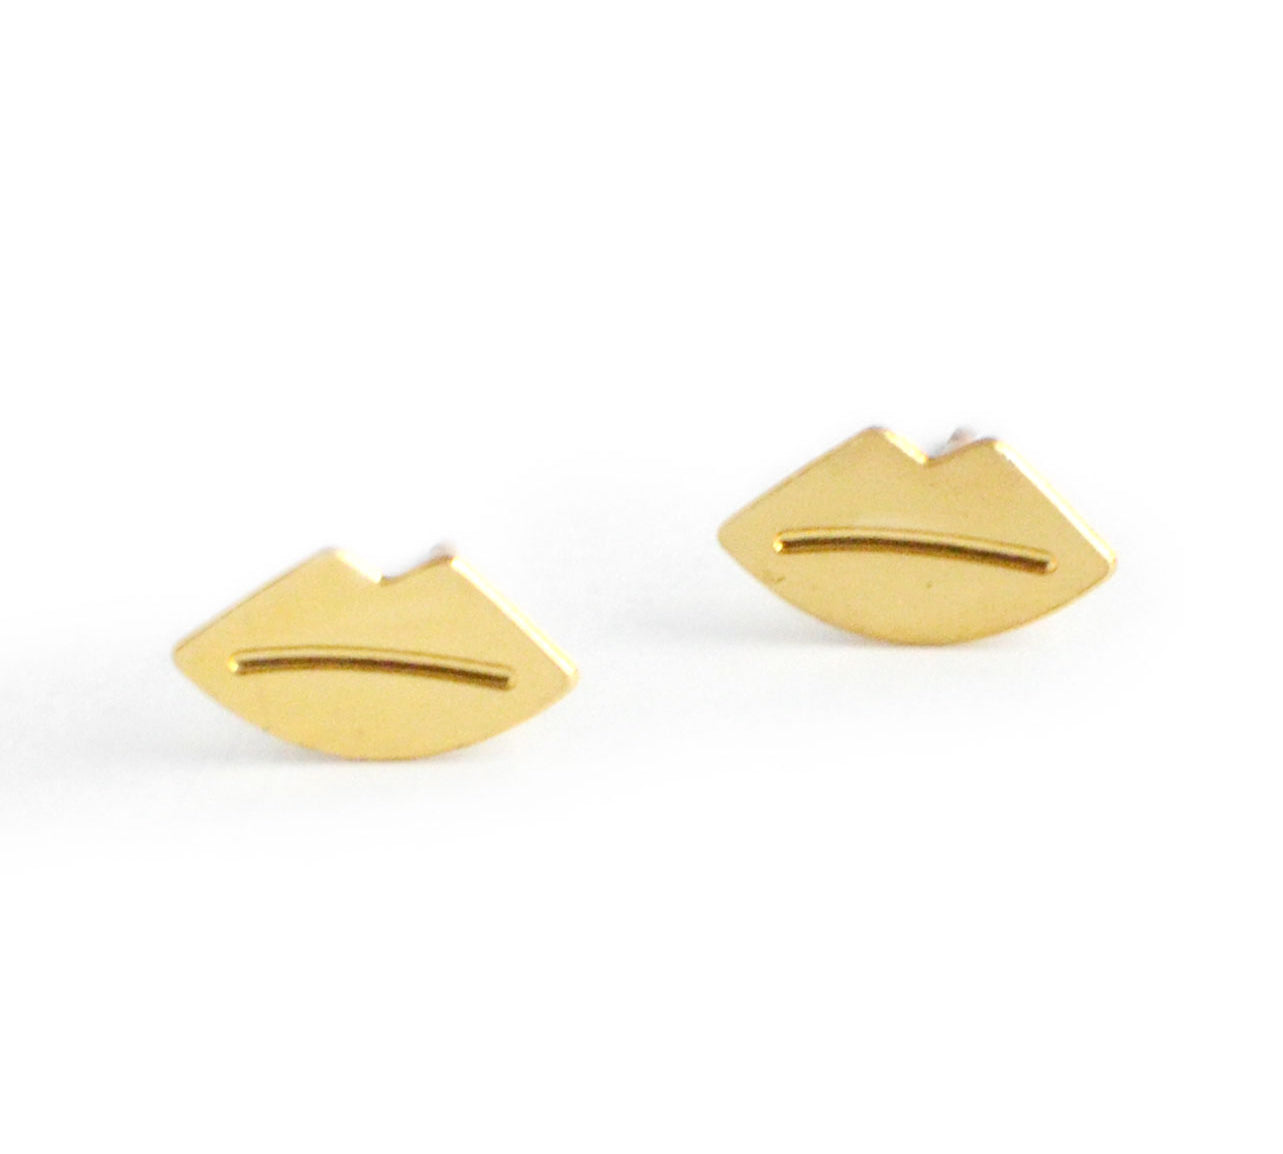 Mini Lips Earrings - High Quality, Affordable Earrings - Available in Gold and Silver - Made in USA - Brevity Jewelry